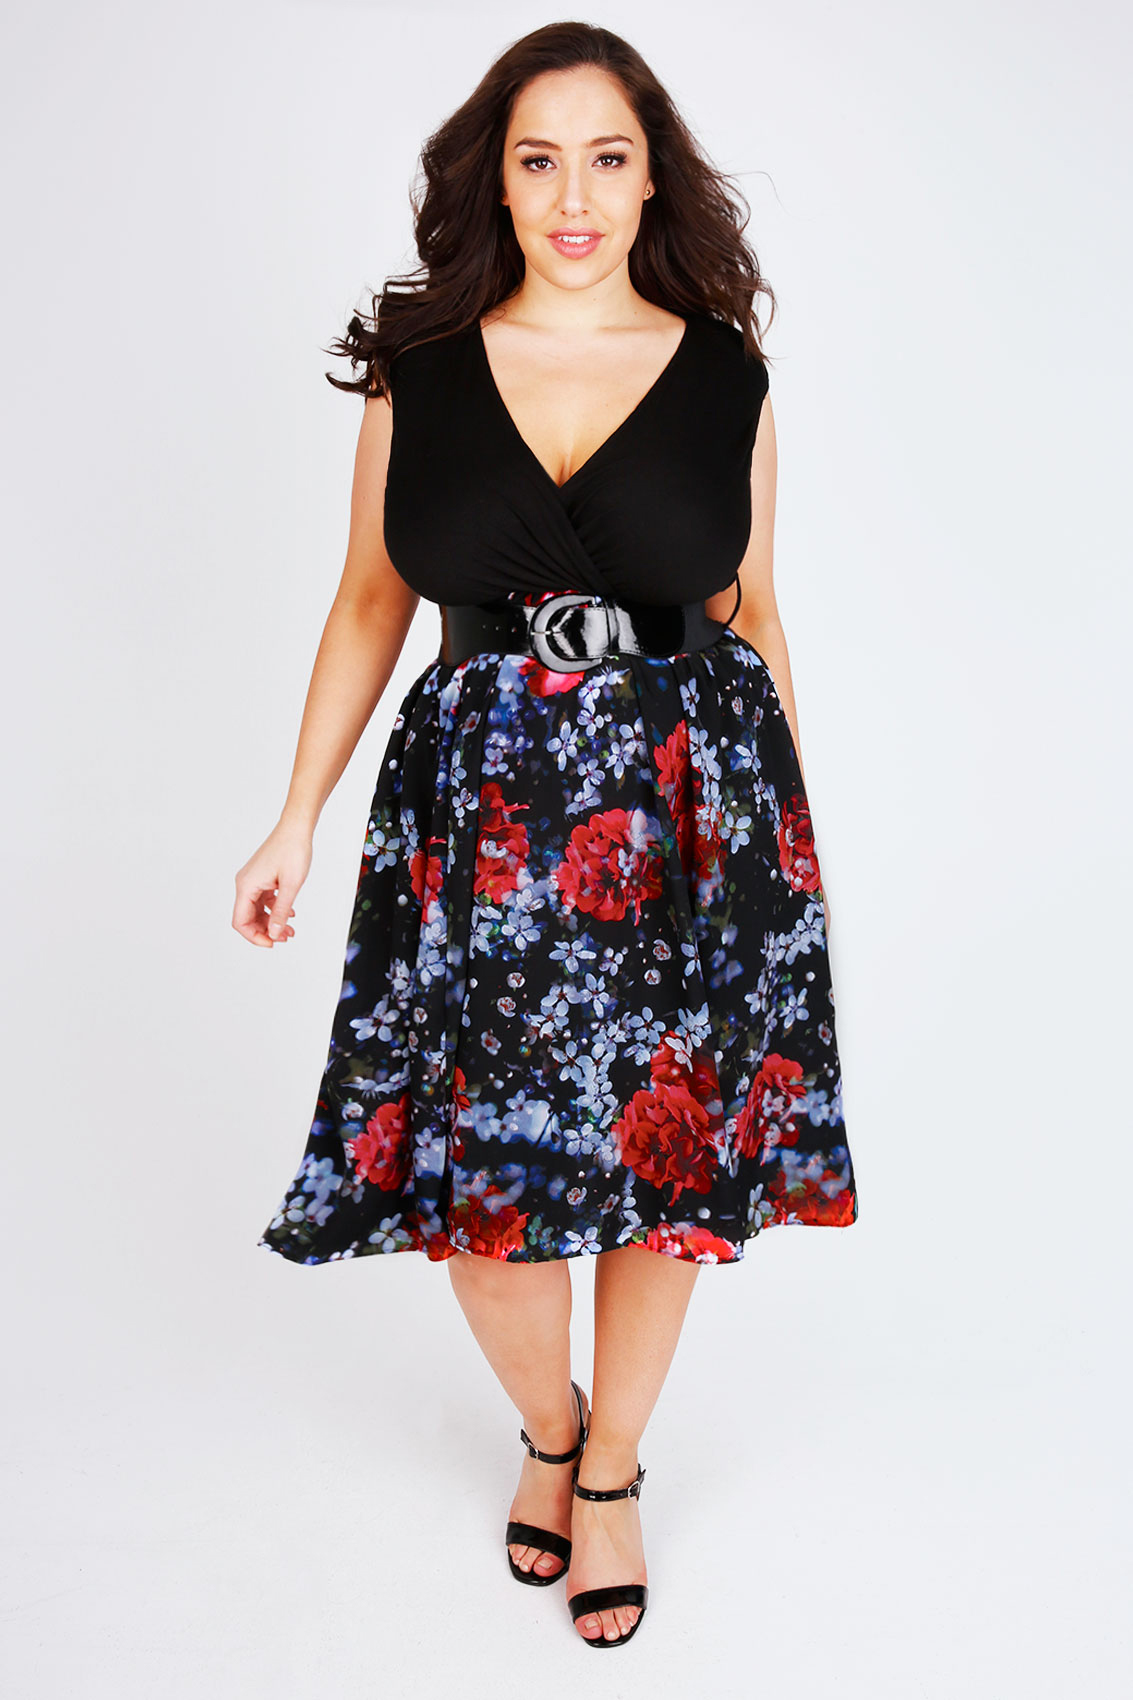 SCARLETT & JO Black and Red Floral Print Sleeveless 2 in 1 Dress Plus ...